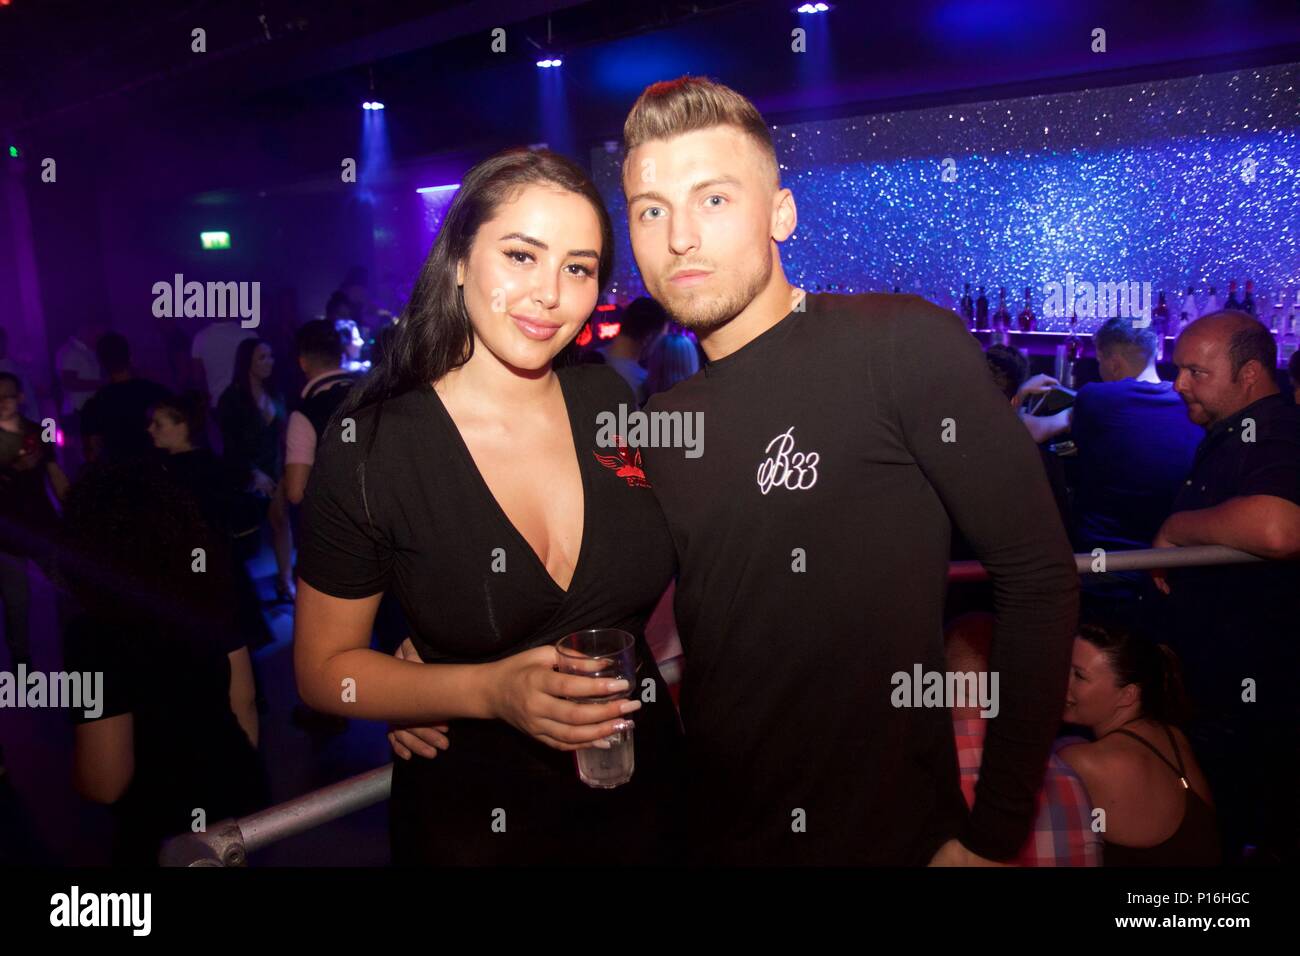 Watford, UK. 10th Jun, 2018. Marnie Simpson and Casey Johnson of Ex On The beach, Geordie Shore and Union J fame drunkenly party with friends at Hydeout 2.0 Watford fresh back from their recent holiday. The couple downed vodka and disaronno as they let their hair down stopping to chat and do shots with fans and stayed until 3am. Credit: Ayeesha Walsh/Alamy Live News Stock Photo